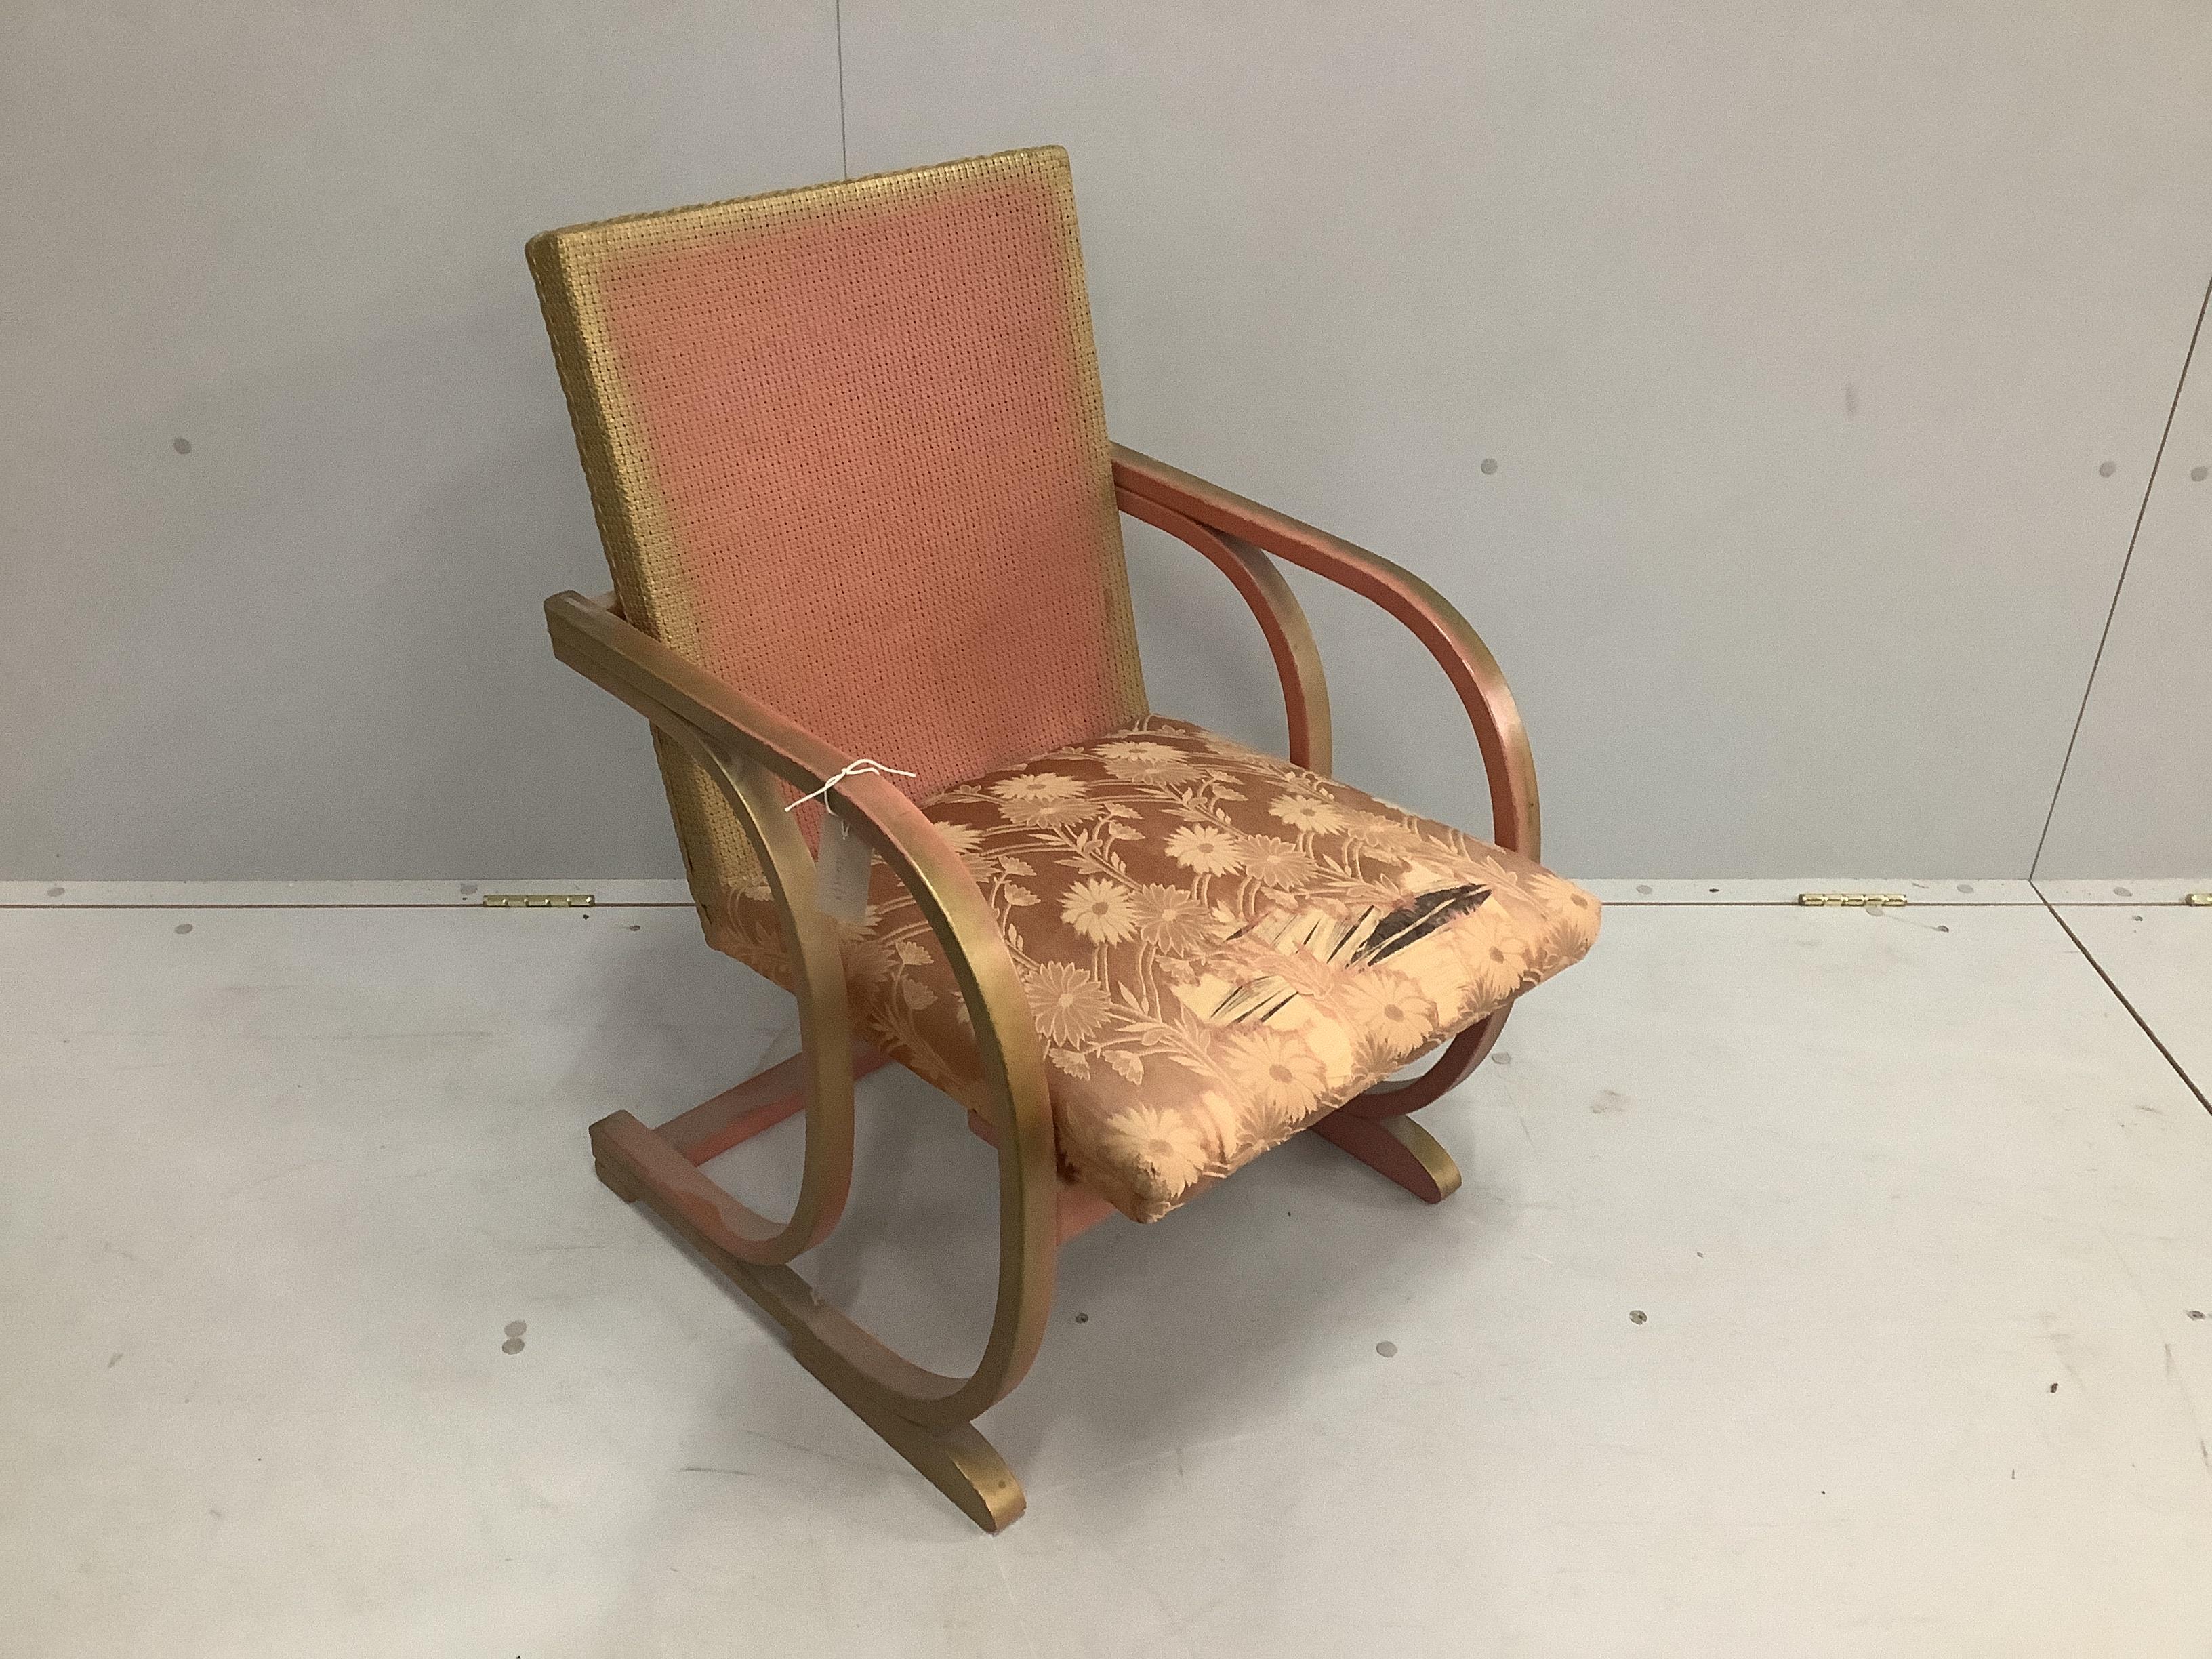 A Lloyd Loom adjustable chair with bentwood arms, width 52cm, depth 51cm, height 80cm                                                                                                                                       